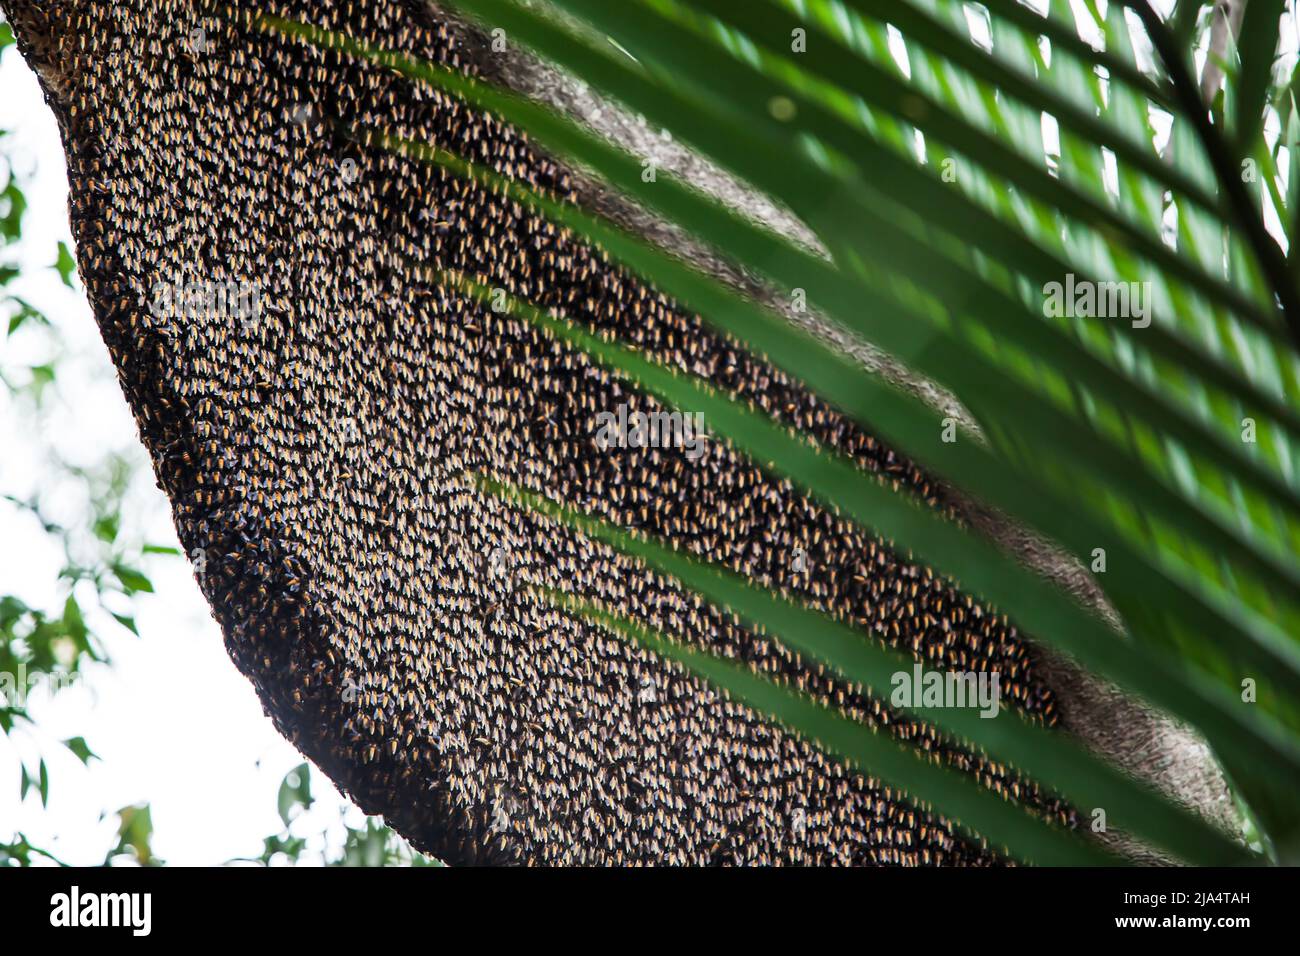 Close-up of a large hive of Asian honeybees on the branch of a mangrove tree, a beehive in a mangrove forest. Stock Photo